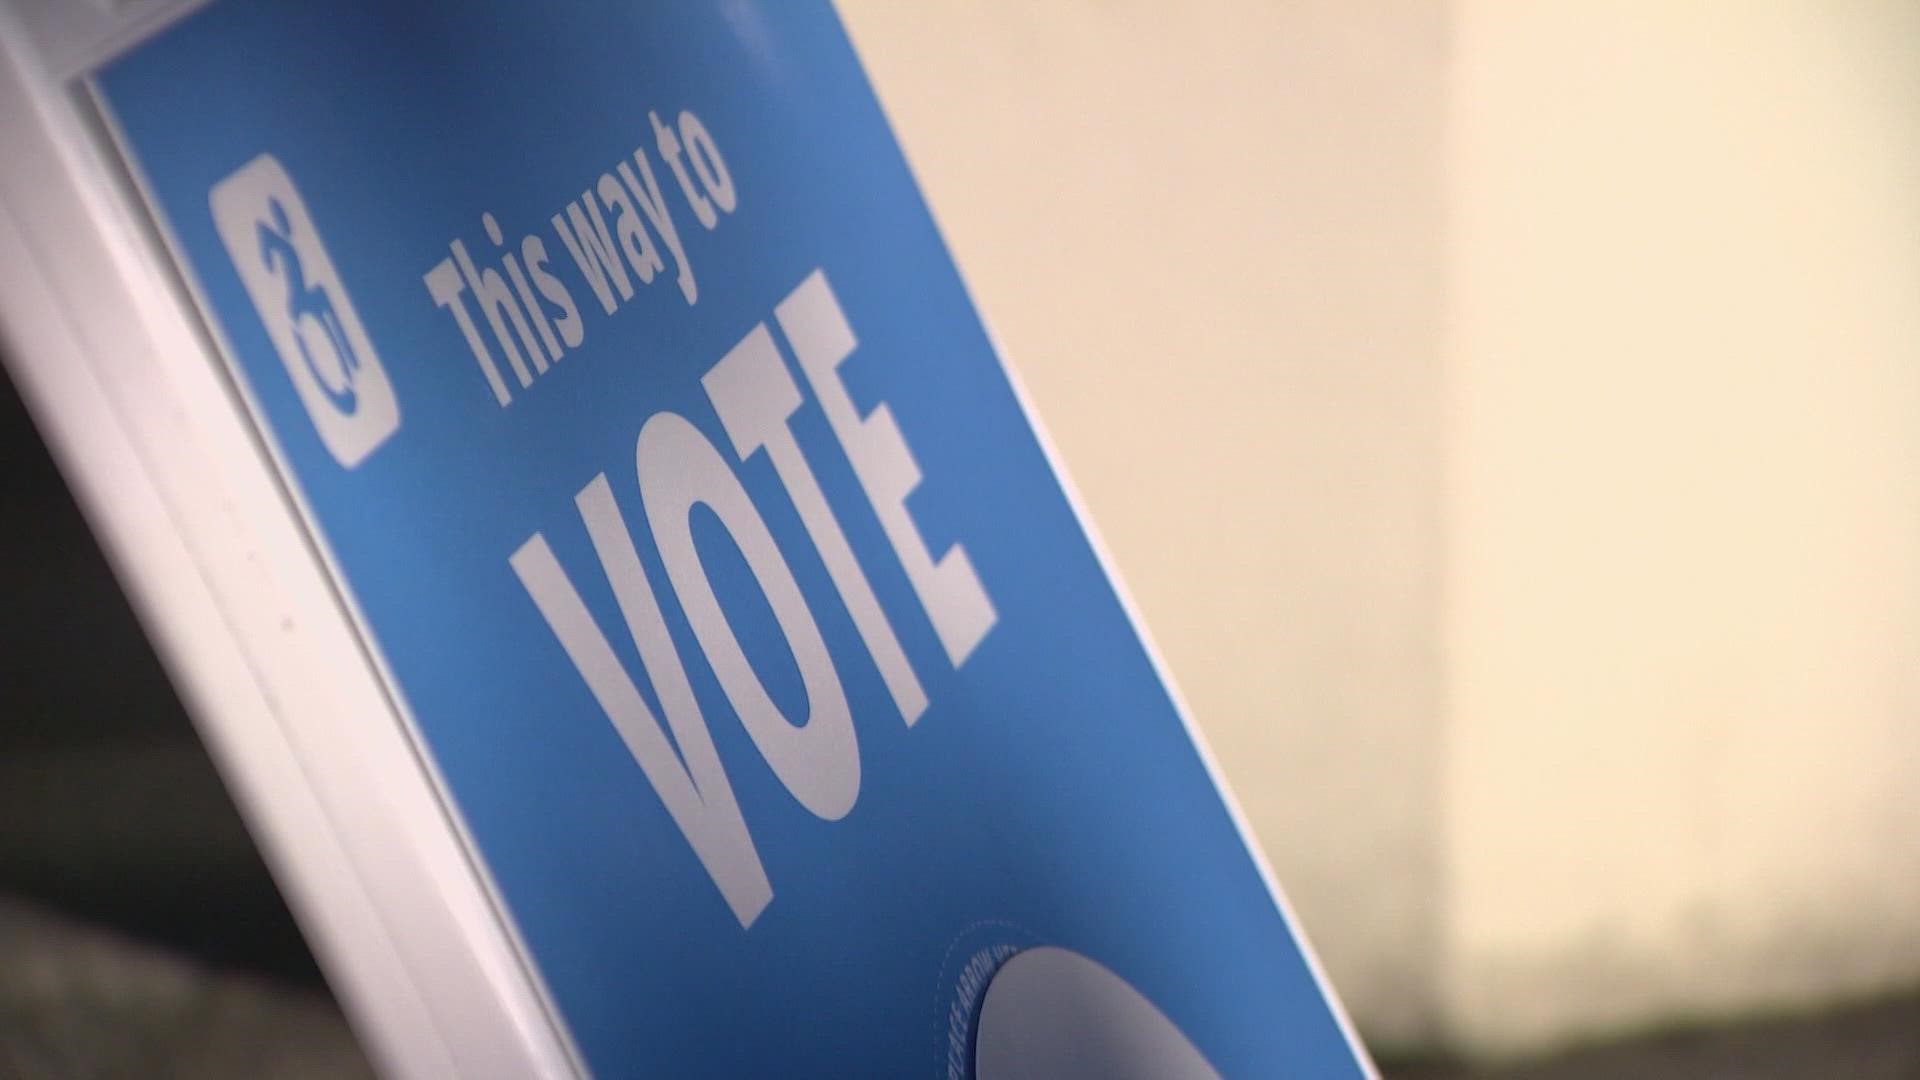 Elections officials are expecting the final turnout for King County to be at 71%, compared to 76% in 2018.